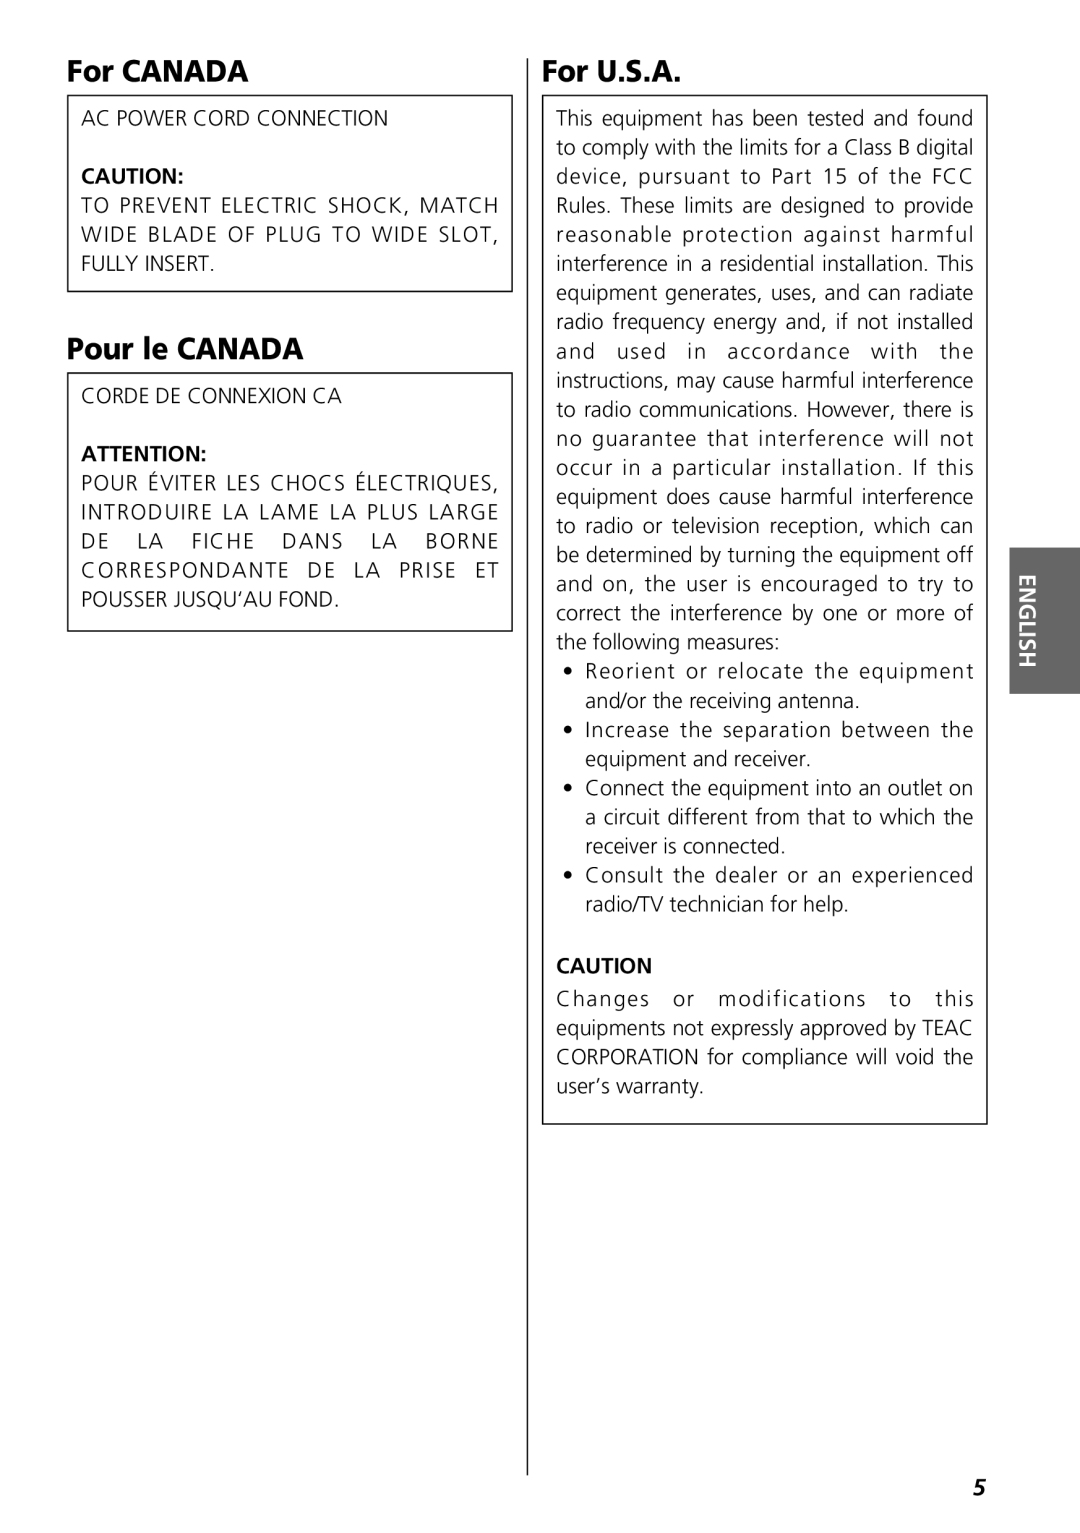 Teac GR-7i owner manual For CANADA, Pour le CANADA, For U.S.A 